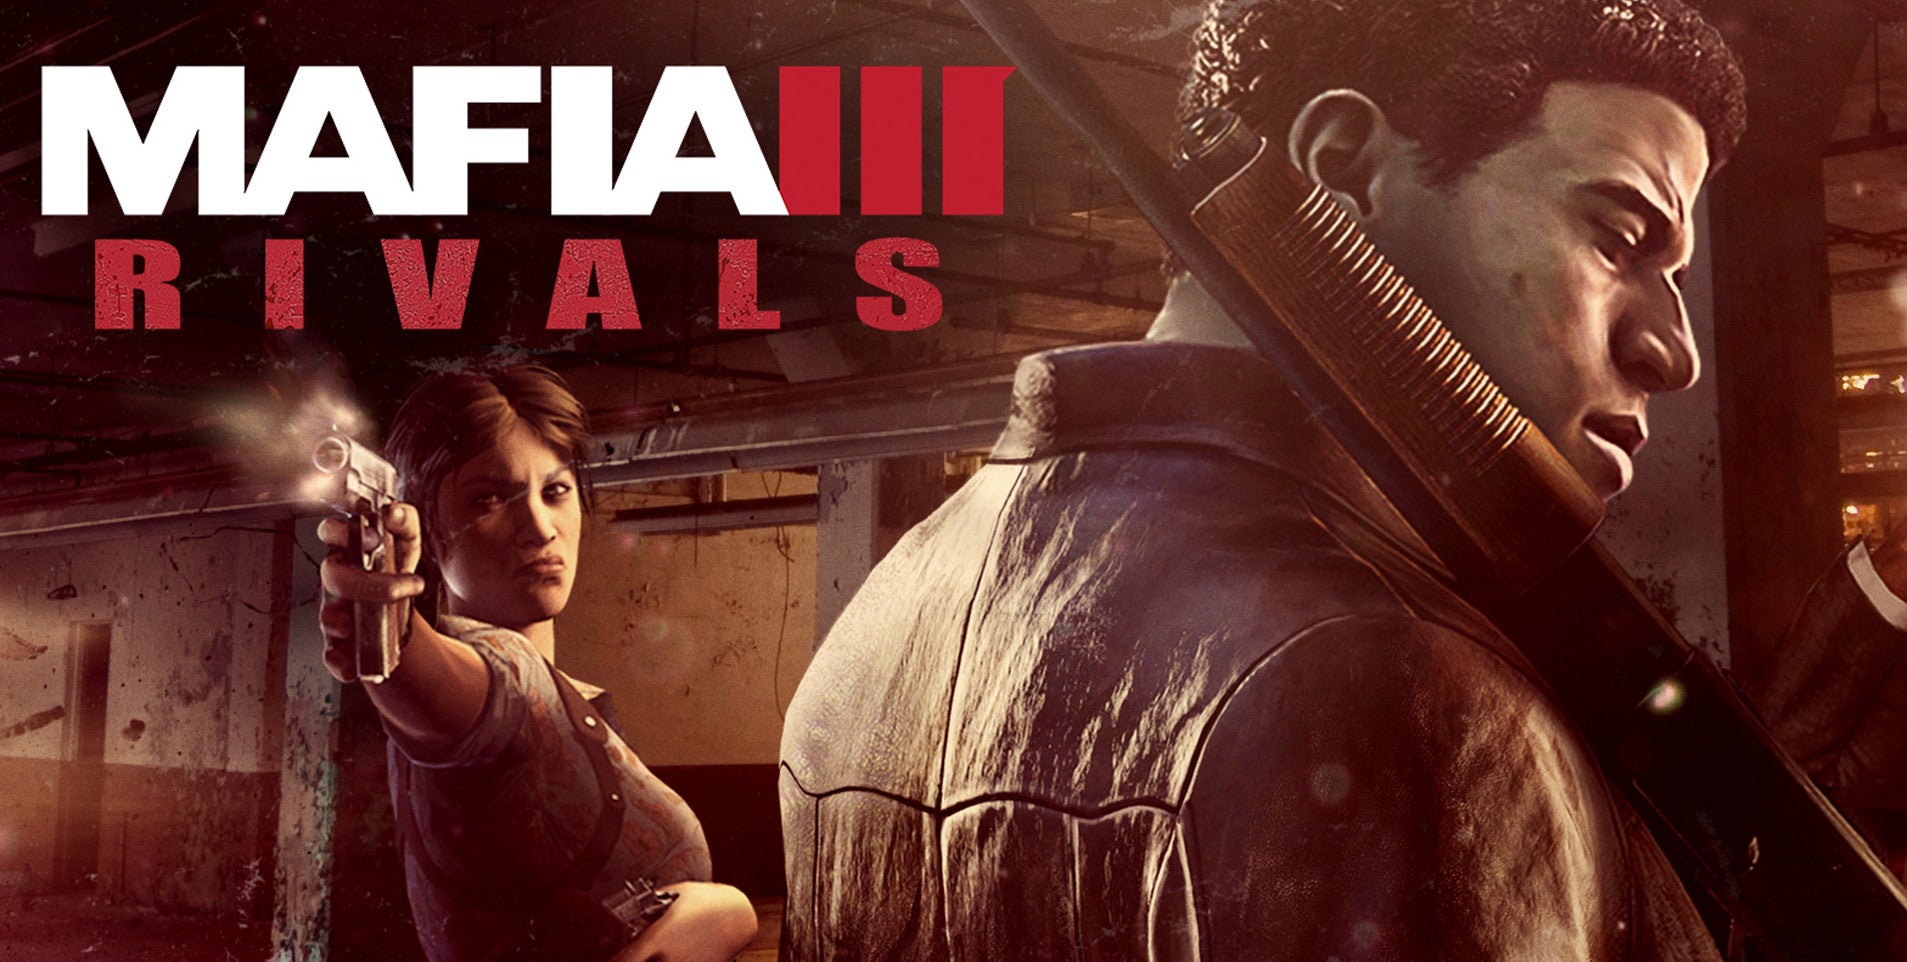 Mafia III: Rivals review – build up your gang and seize control of New Bordeaux